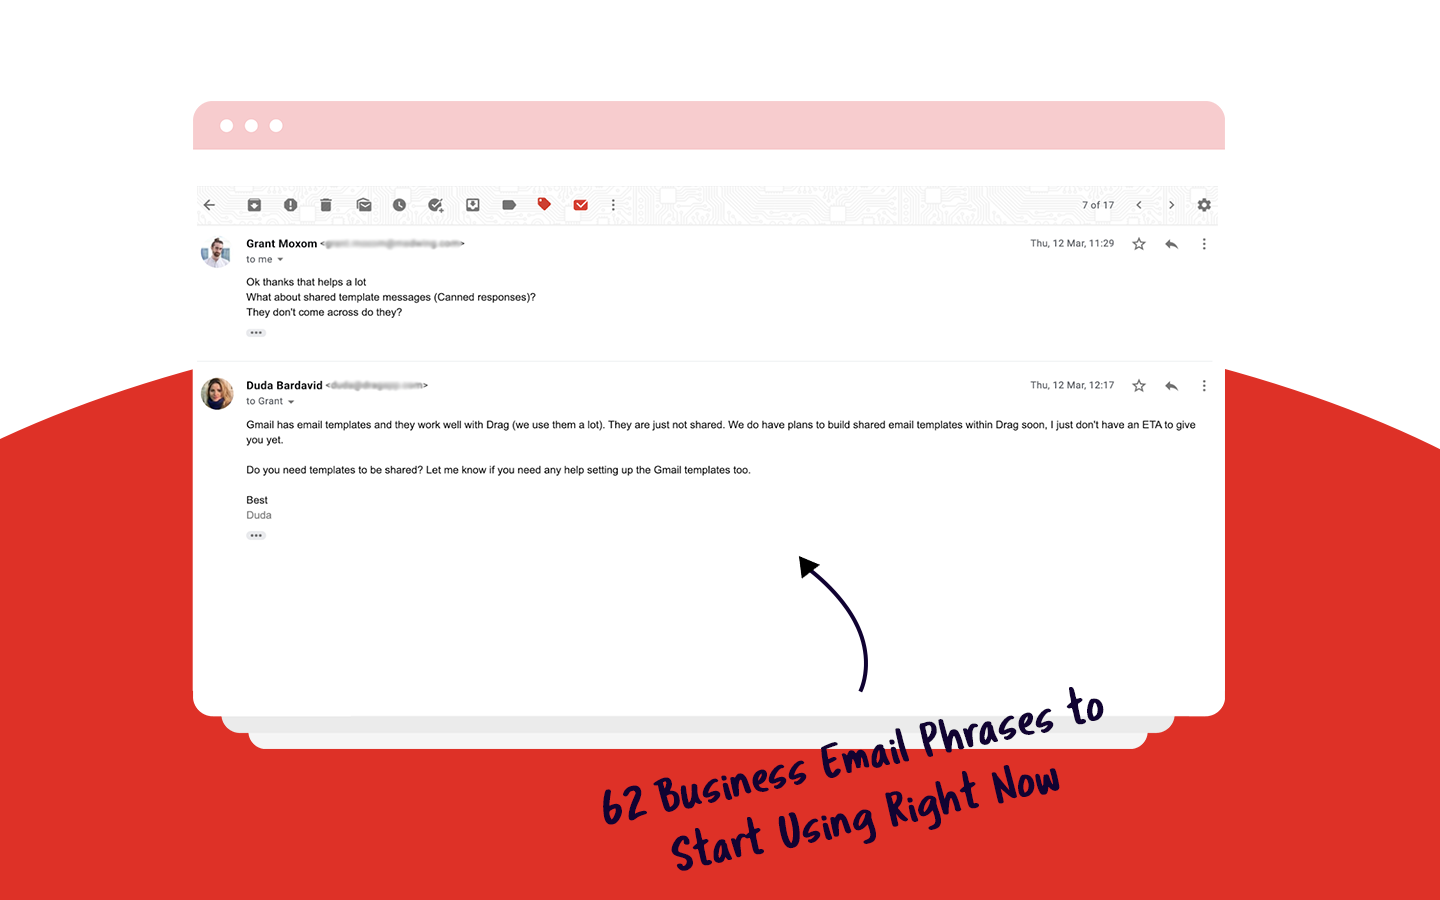 15 Business Email Phrases to Start Using Right Now  DragApp.com